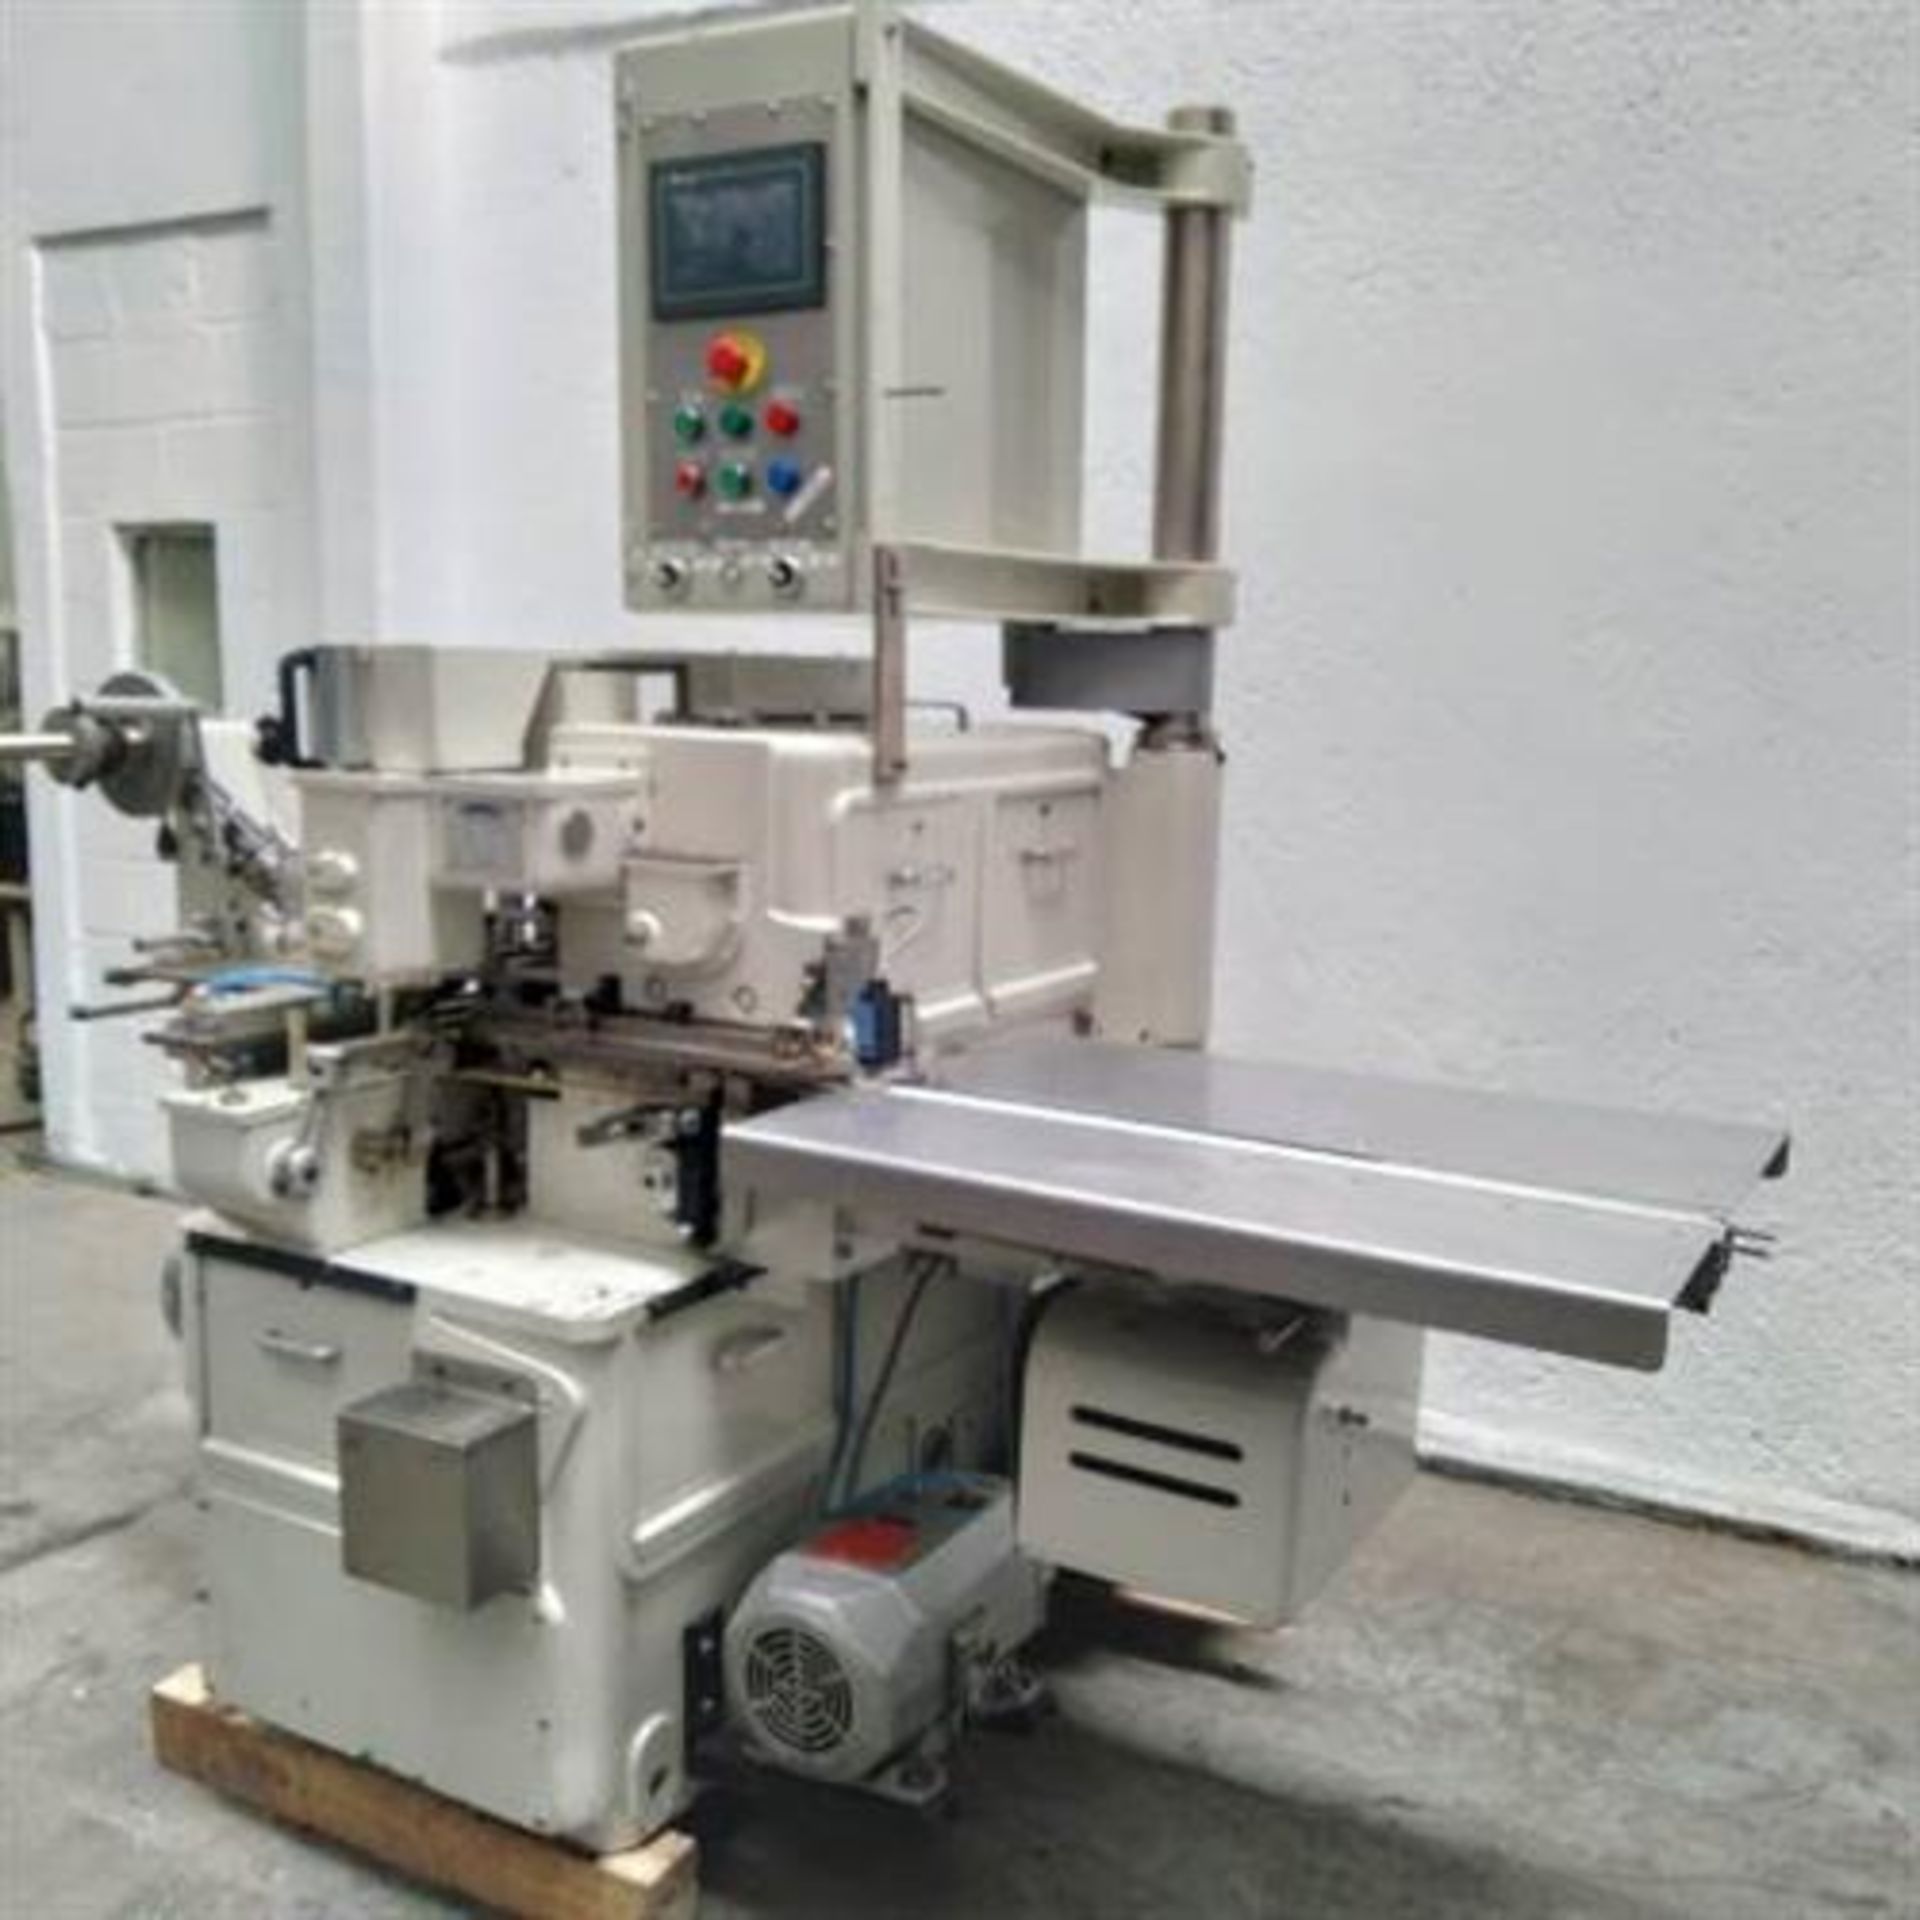 Sapal model Bi-b Die Fold Wrapper - Serial number 10911/1988 - Built new in 1988 - Set for a piece - Image 2 of 8